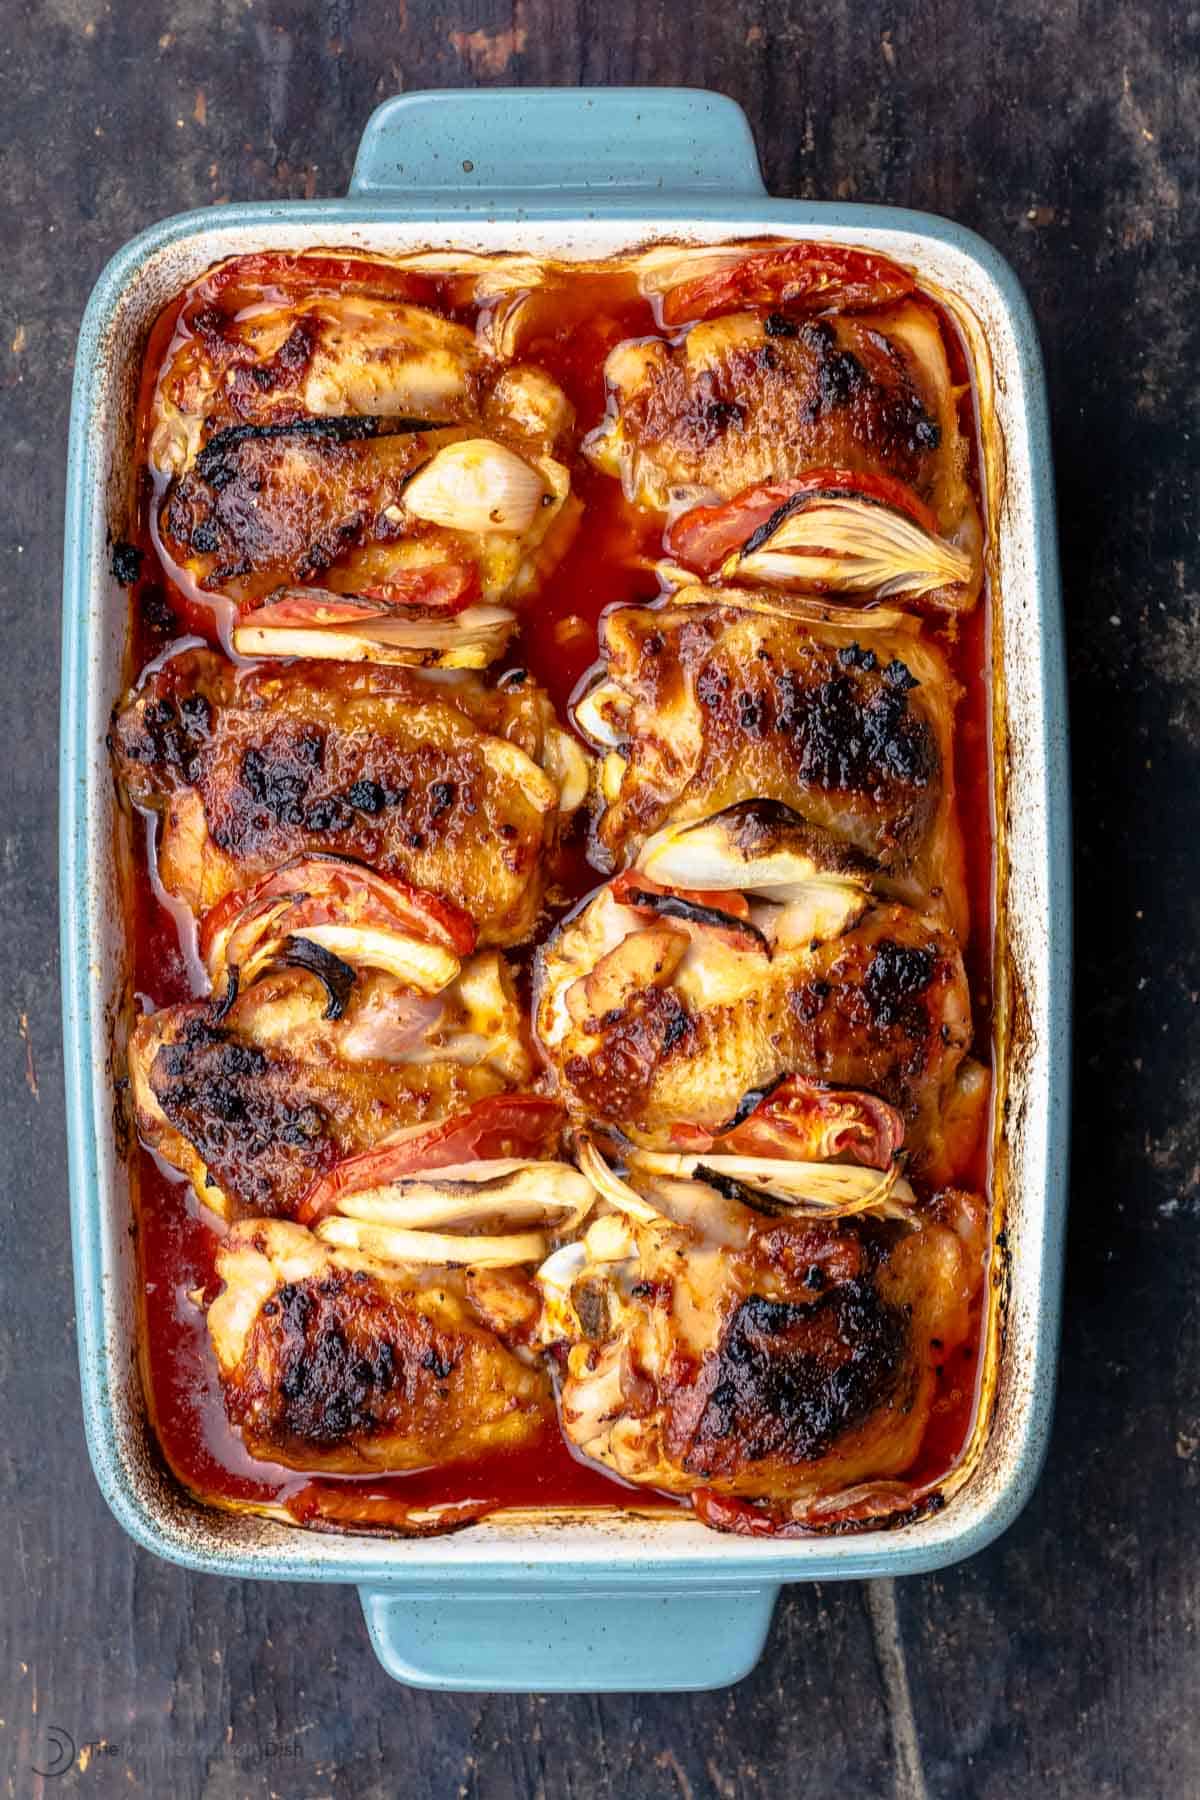 Baked chicken thighs in a large baking dish